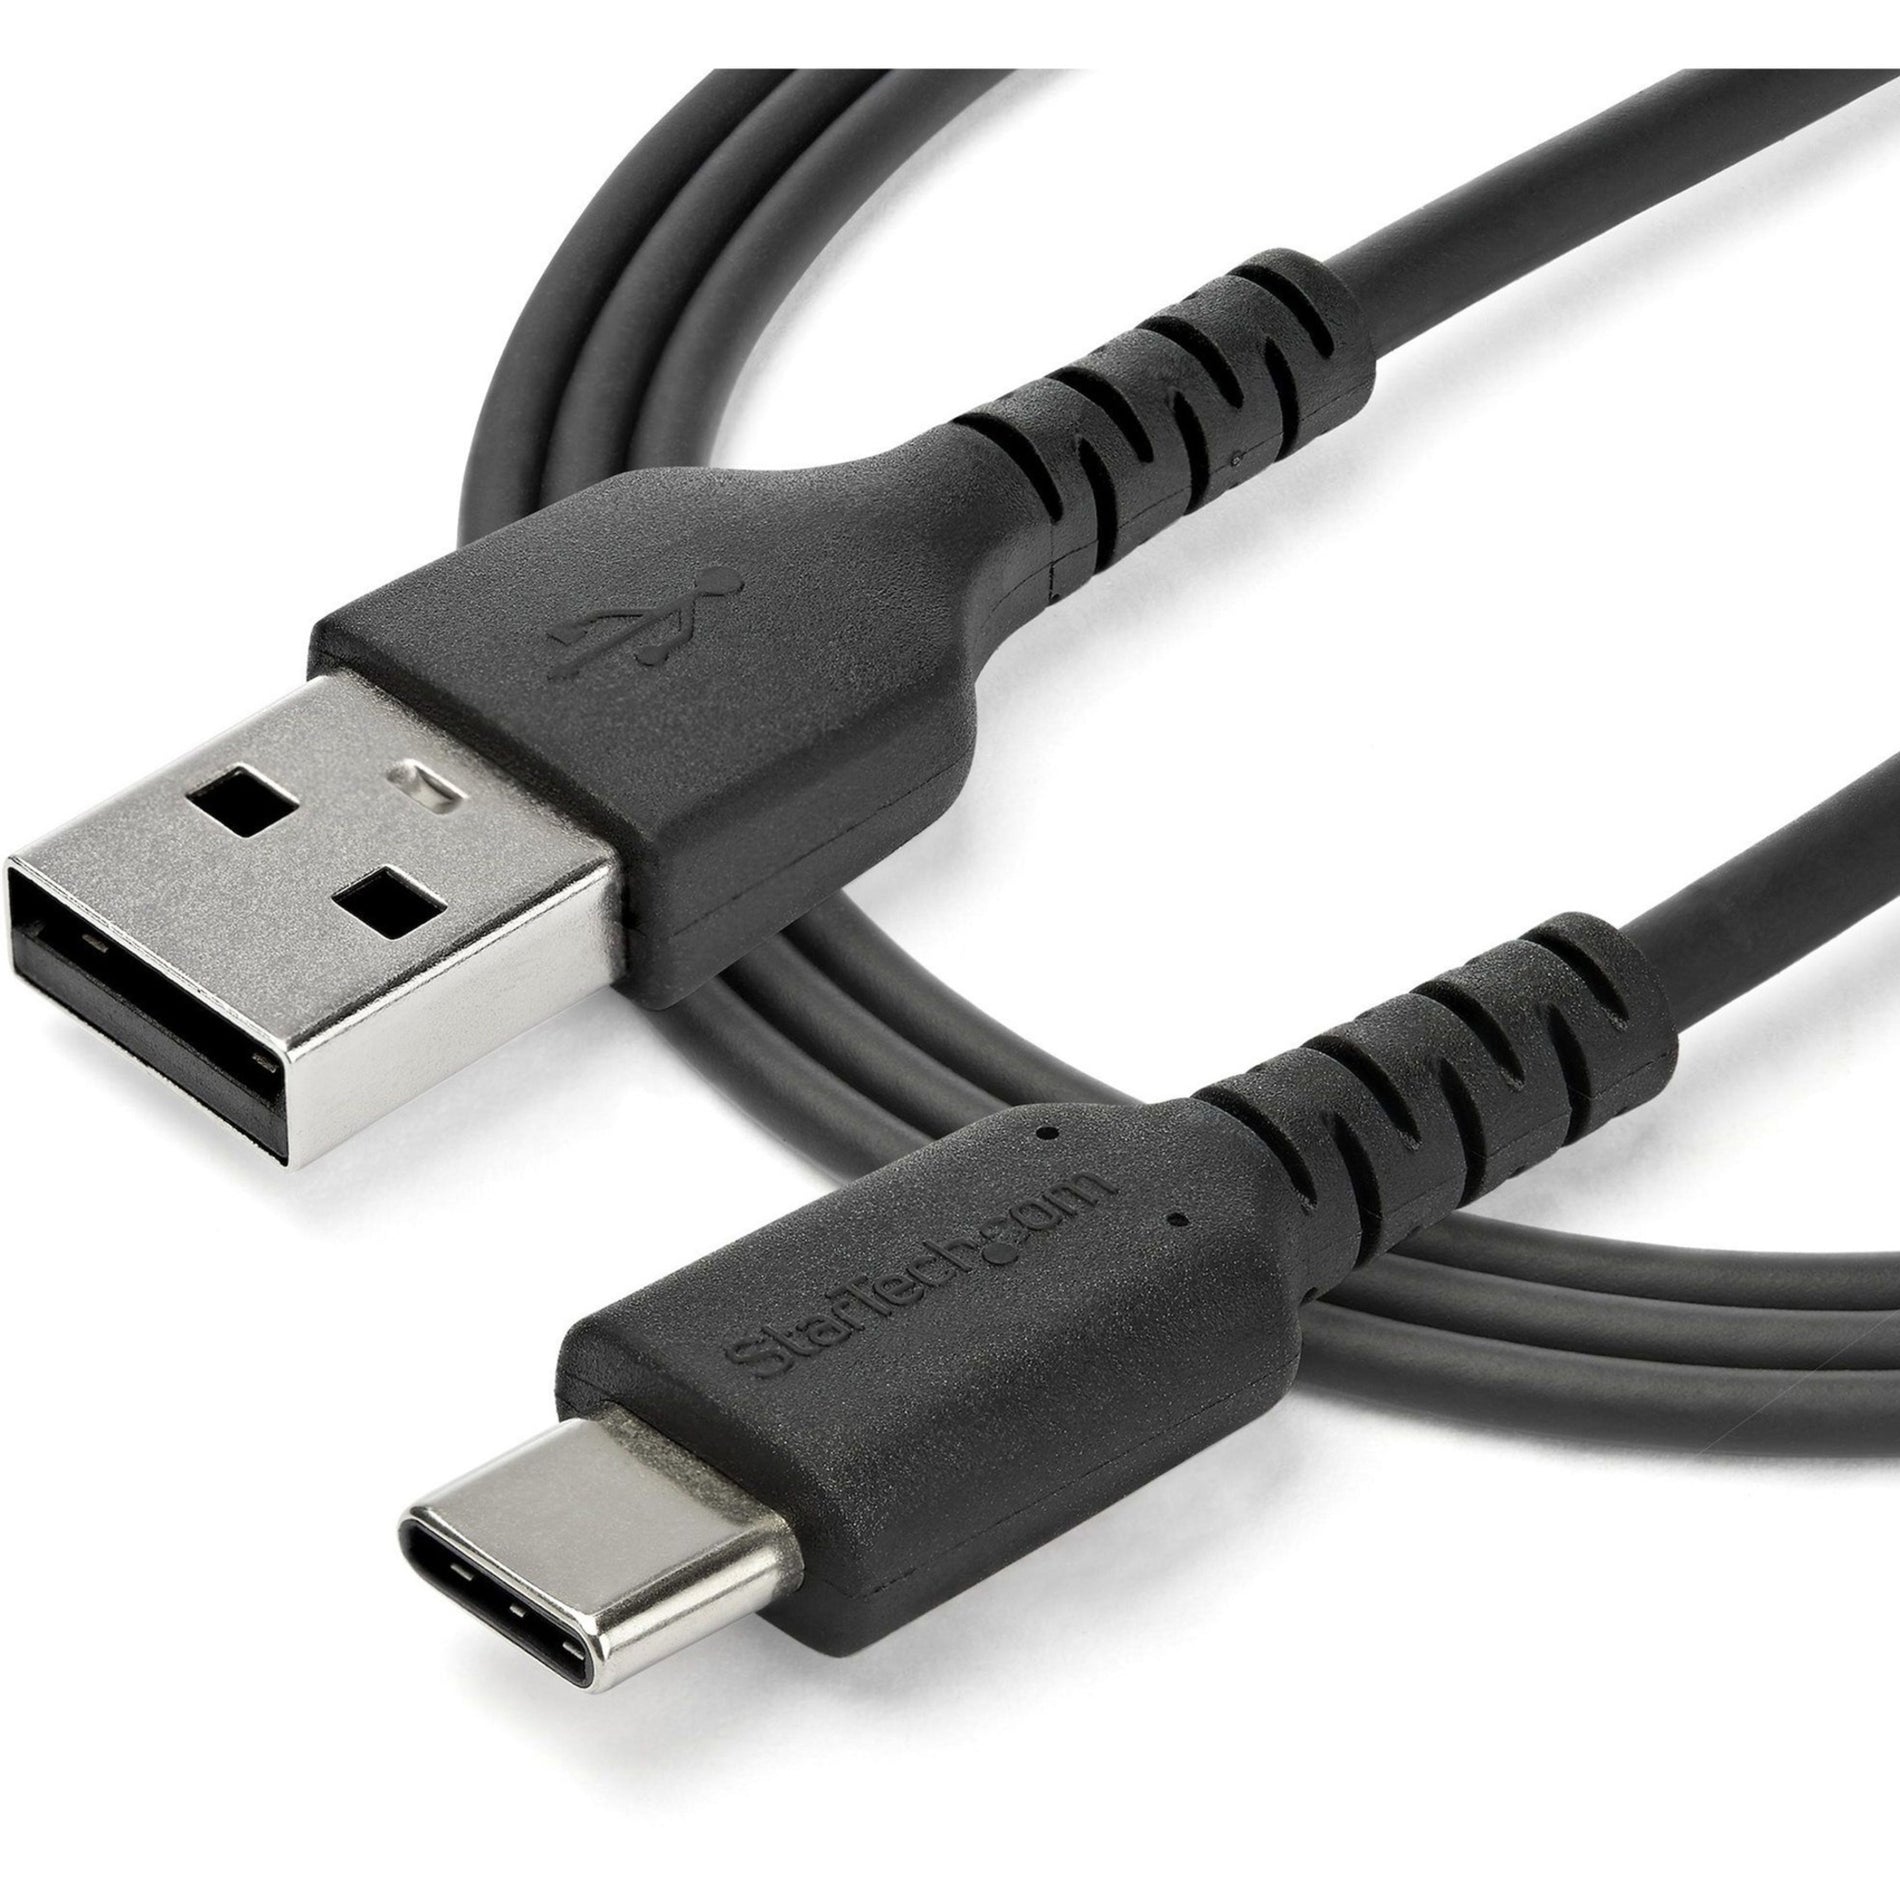 StarTech.com RUSB2AC1MB 1 m (3.3 ft.) USB 2.0 to USB C Cable, High Quality USB Cable, Black, USB Data Transfer Cable